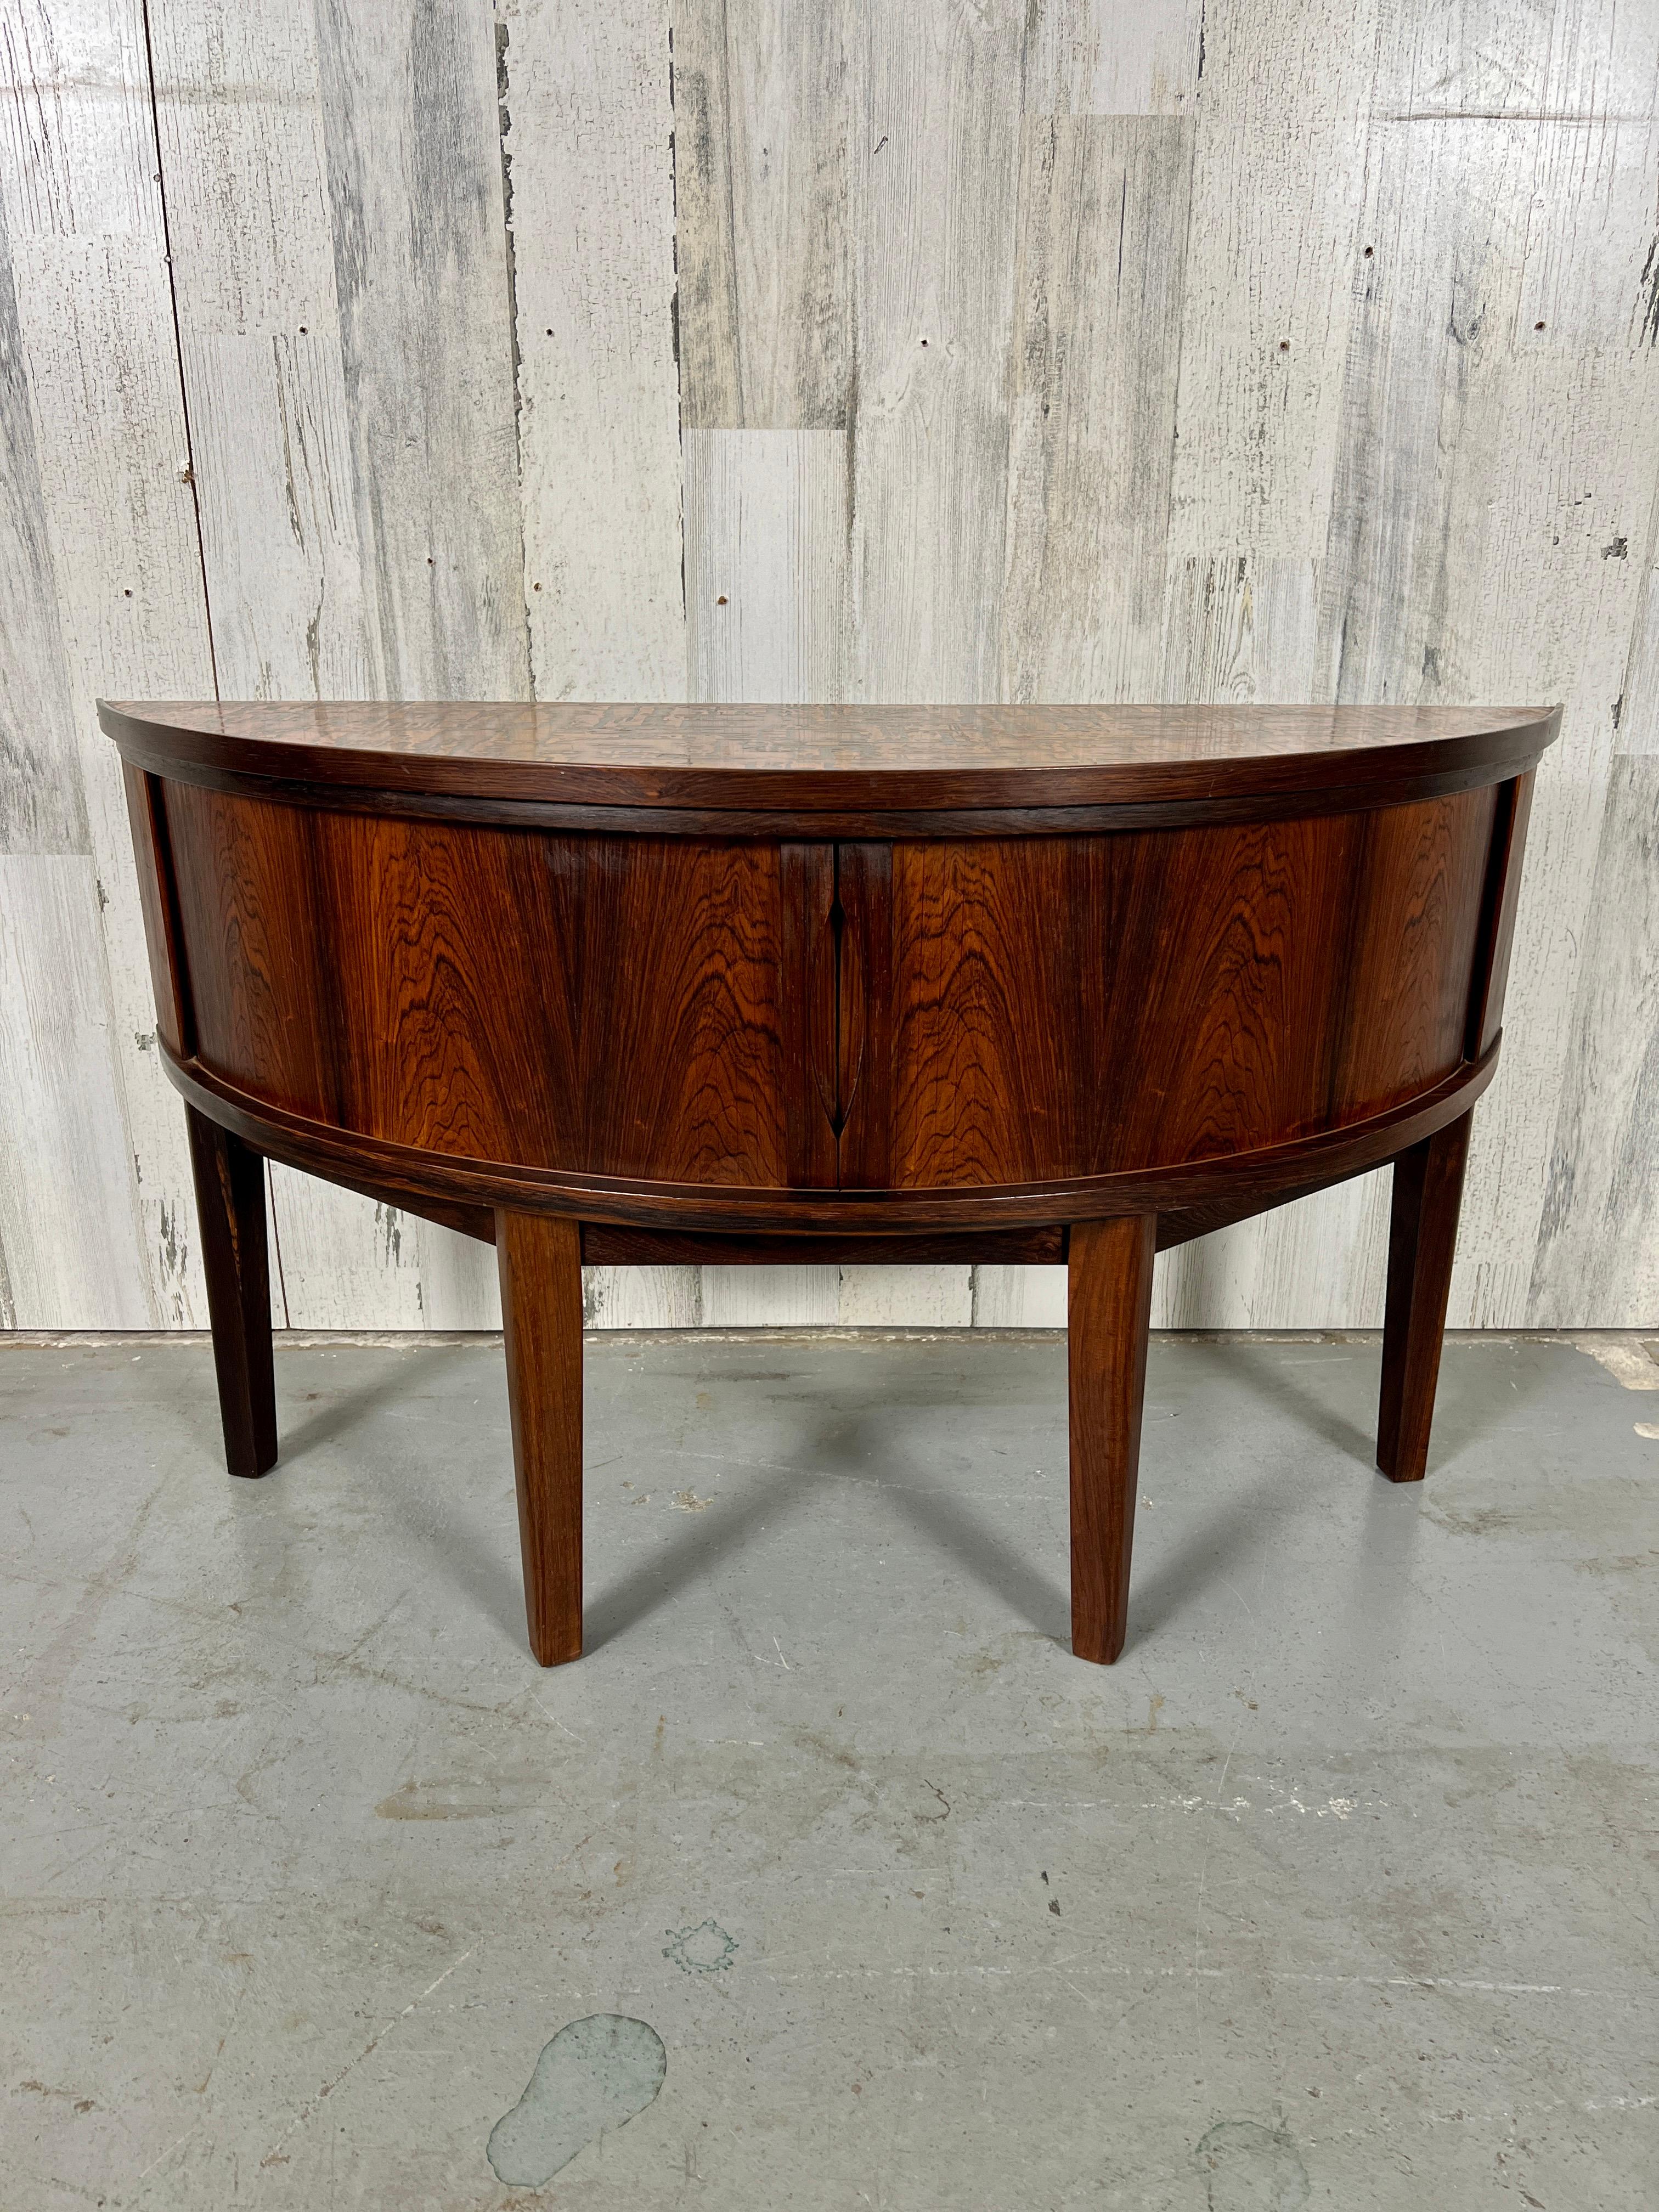 Rare petit embossed copper top rosewood demi lune console / side table with tambour doors. Beautiful original condition with minor wear.